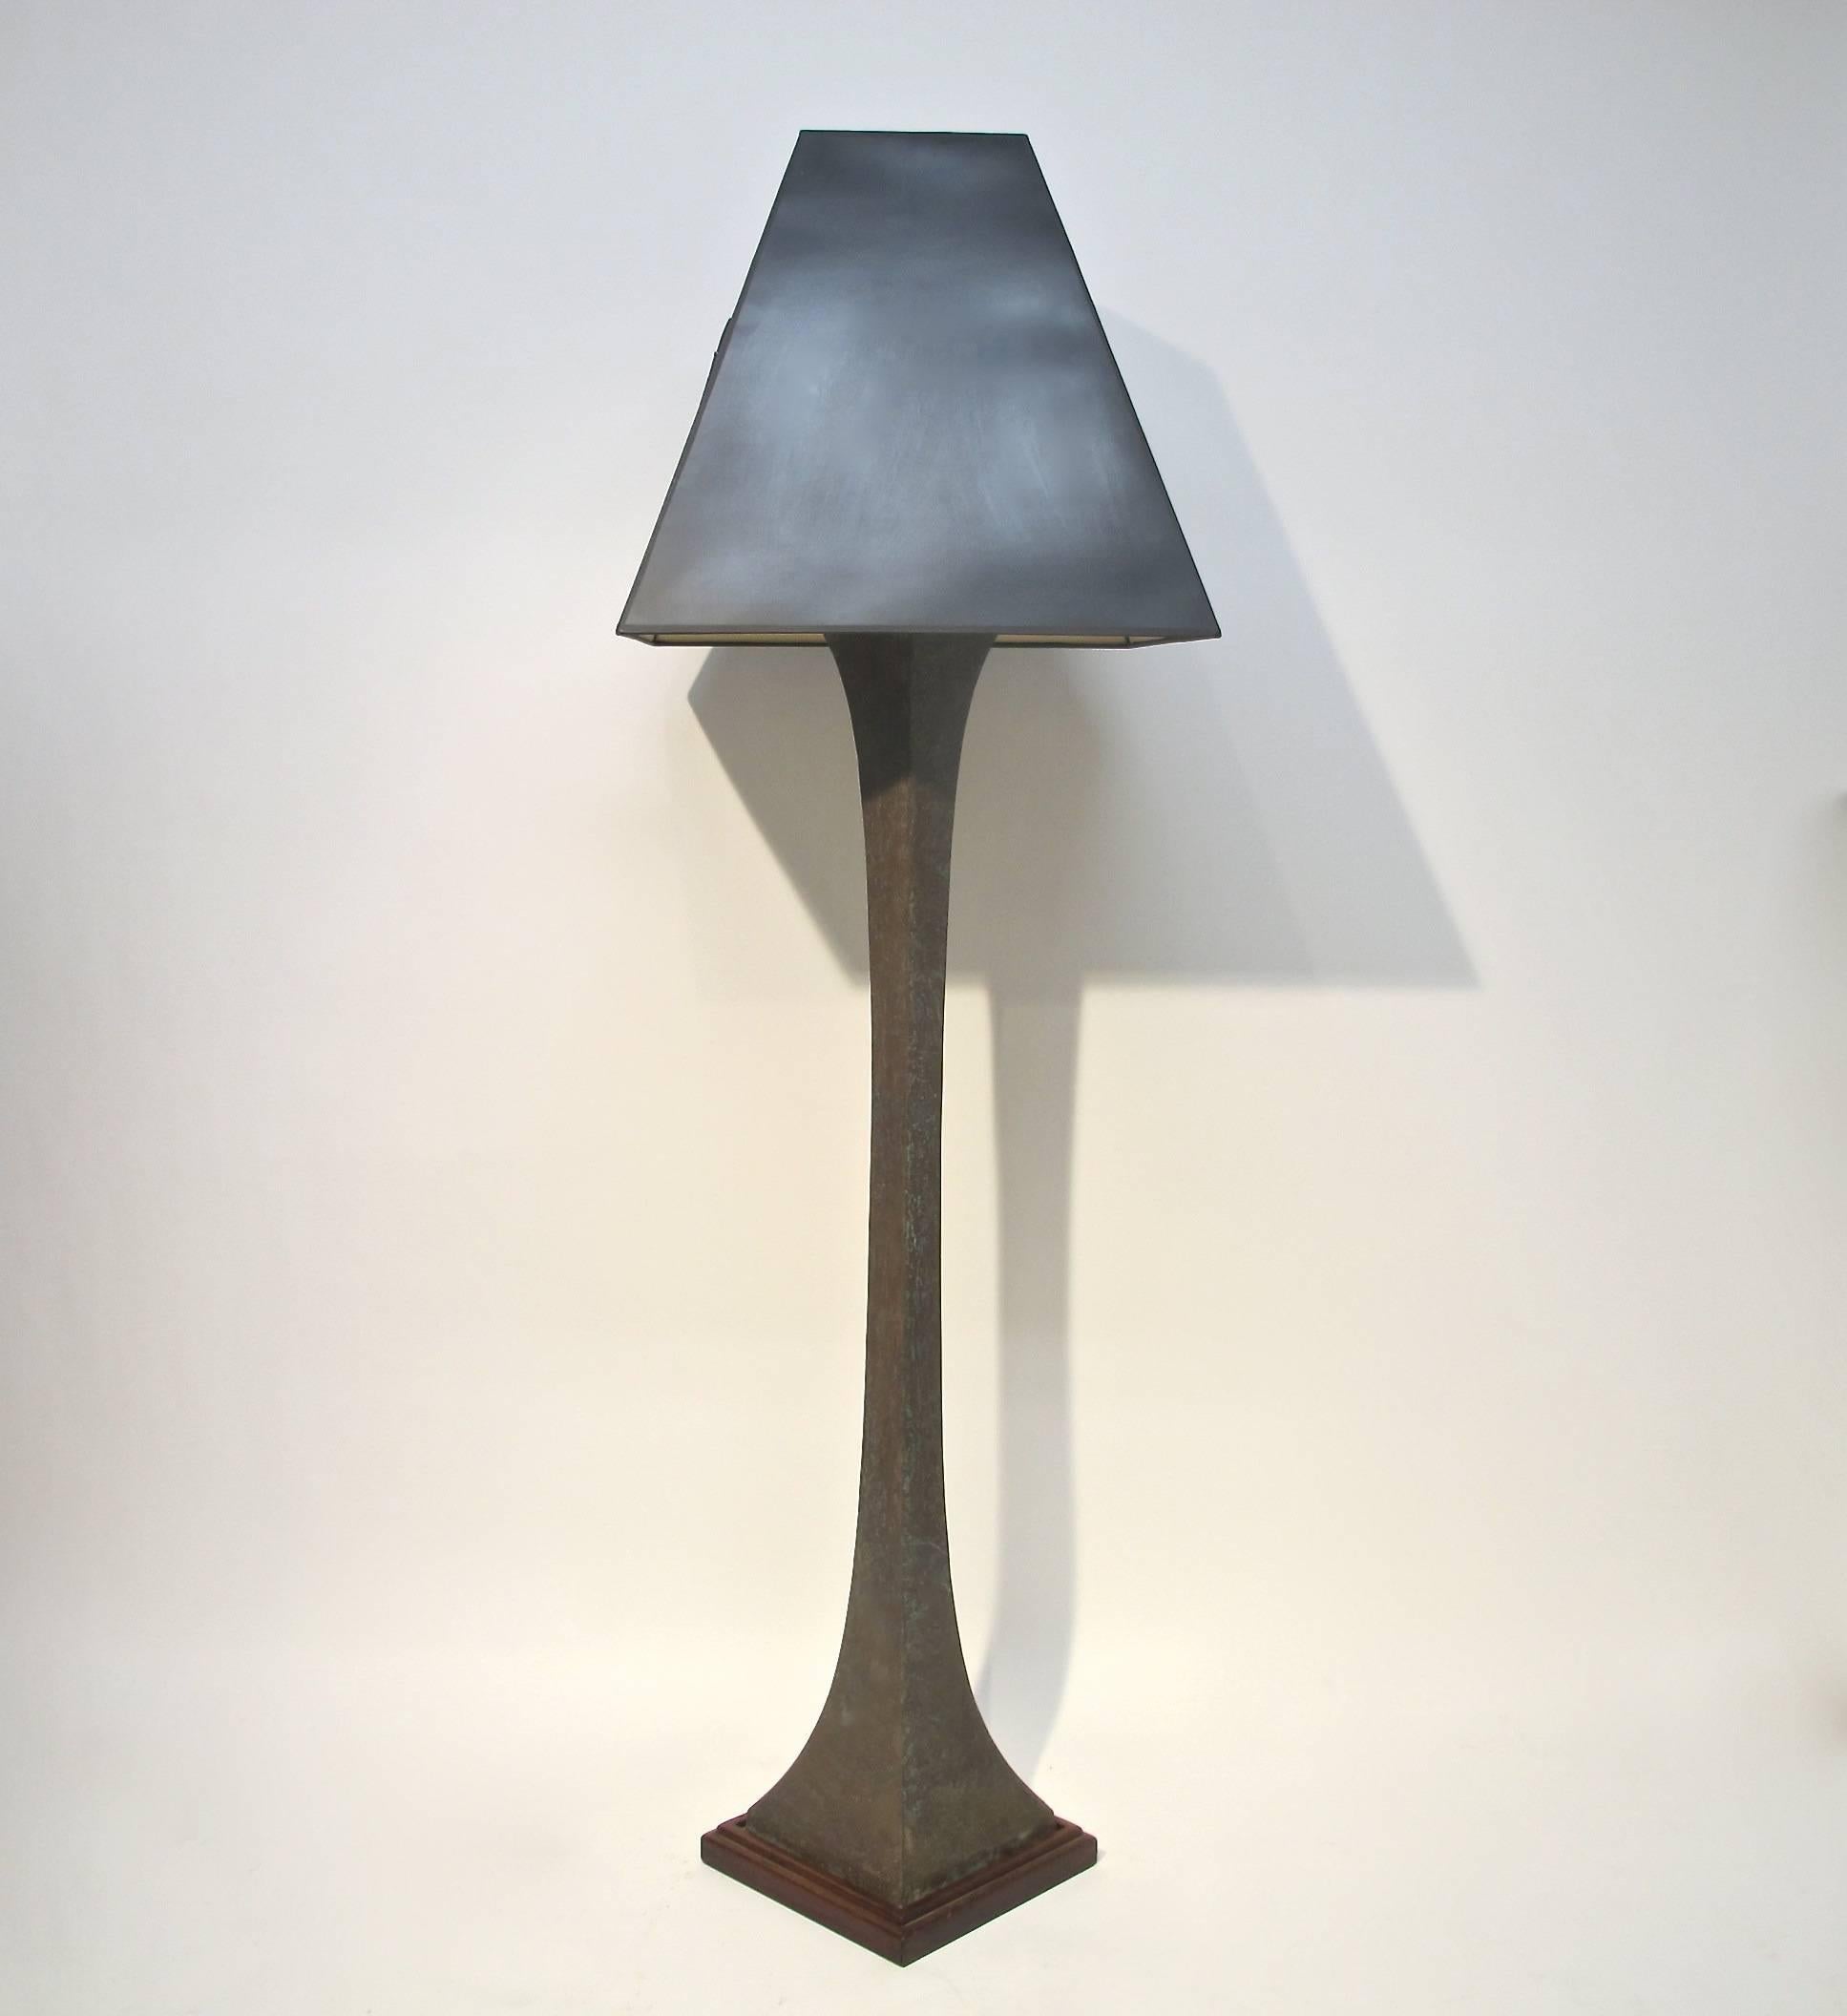 Sculptural Patinated Bronze Square Floor Lamp sitting on a rosewood plinth base by Lawerence & Scott.  This iconic design was featured in several of Maison Jansen interiors in the 1960's.  American, Circa 1970's.  
Shade only for photo not included.